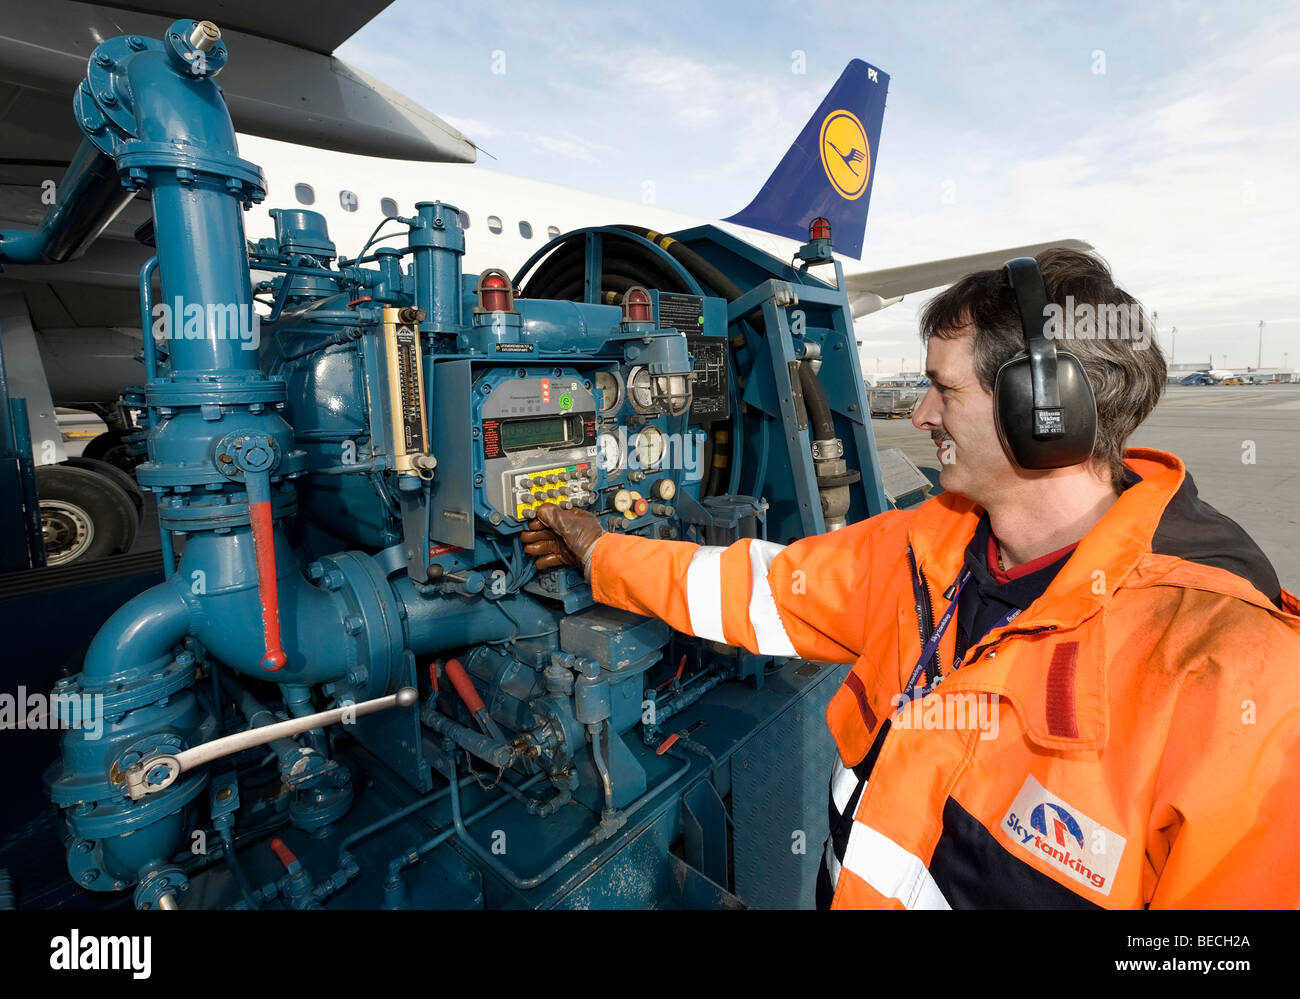 An employee of the company Skytanking refuelling a Lufthansa Airbus A320-200, at Franz Josef Strauss Airport, Munich Airport, M Stock Photo